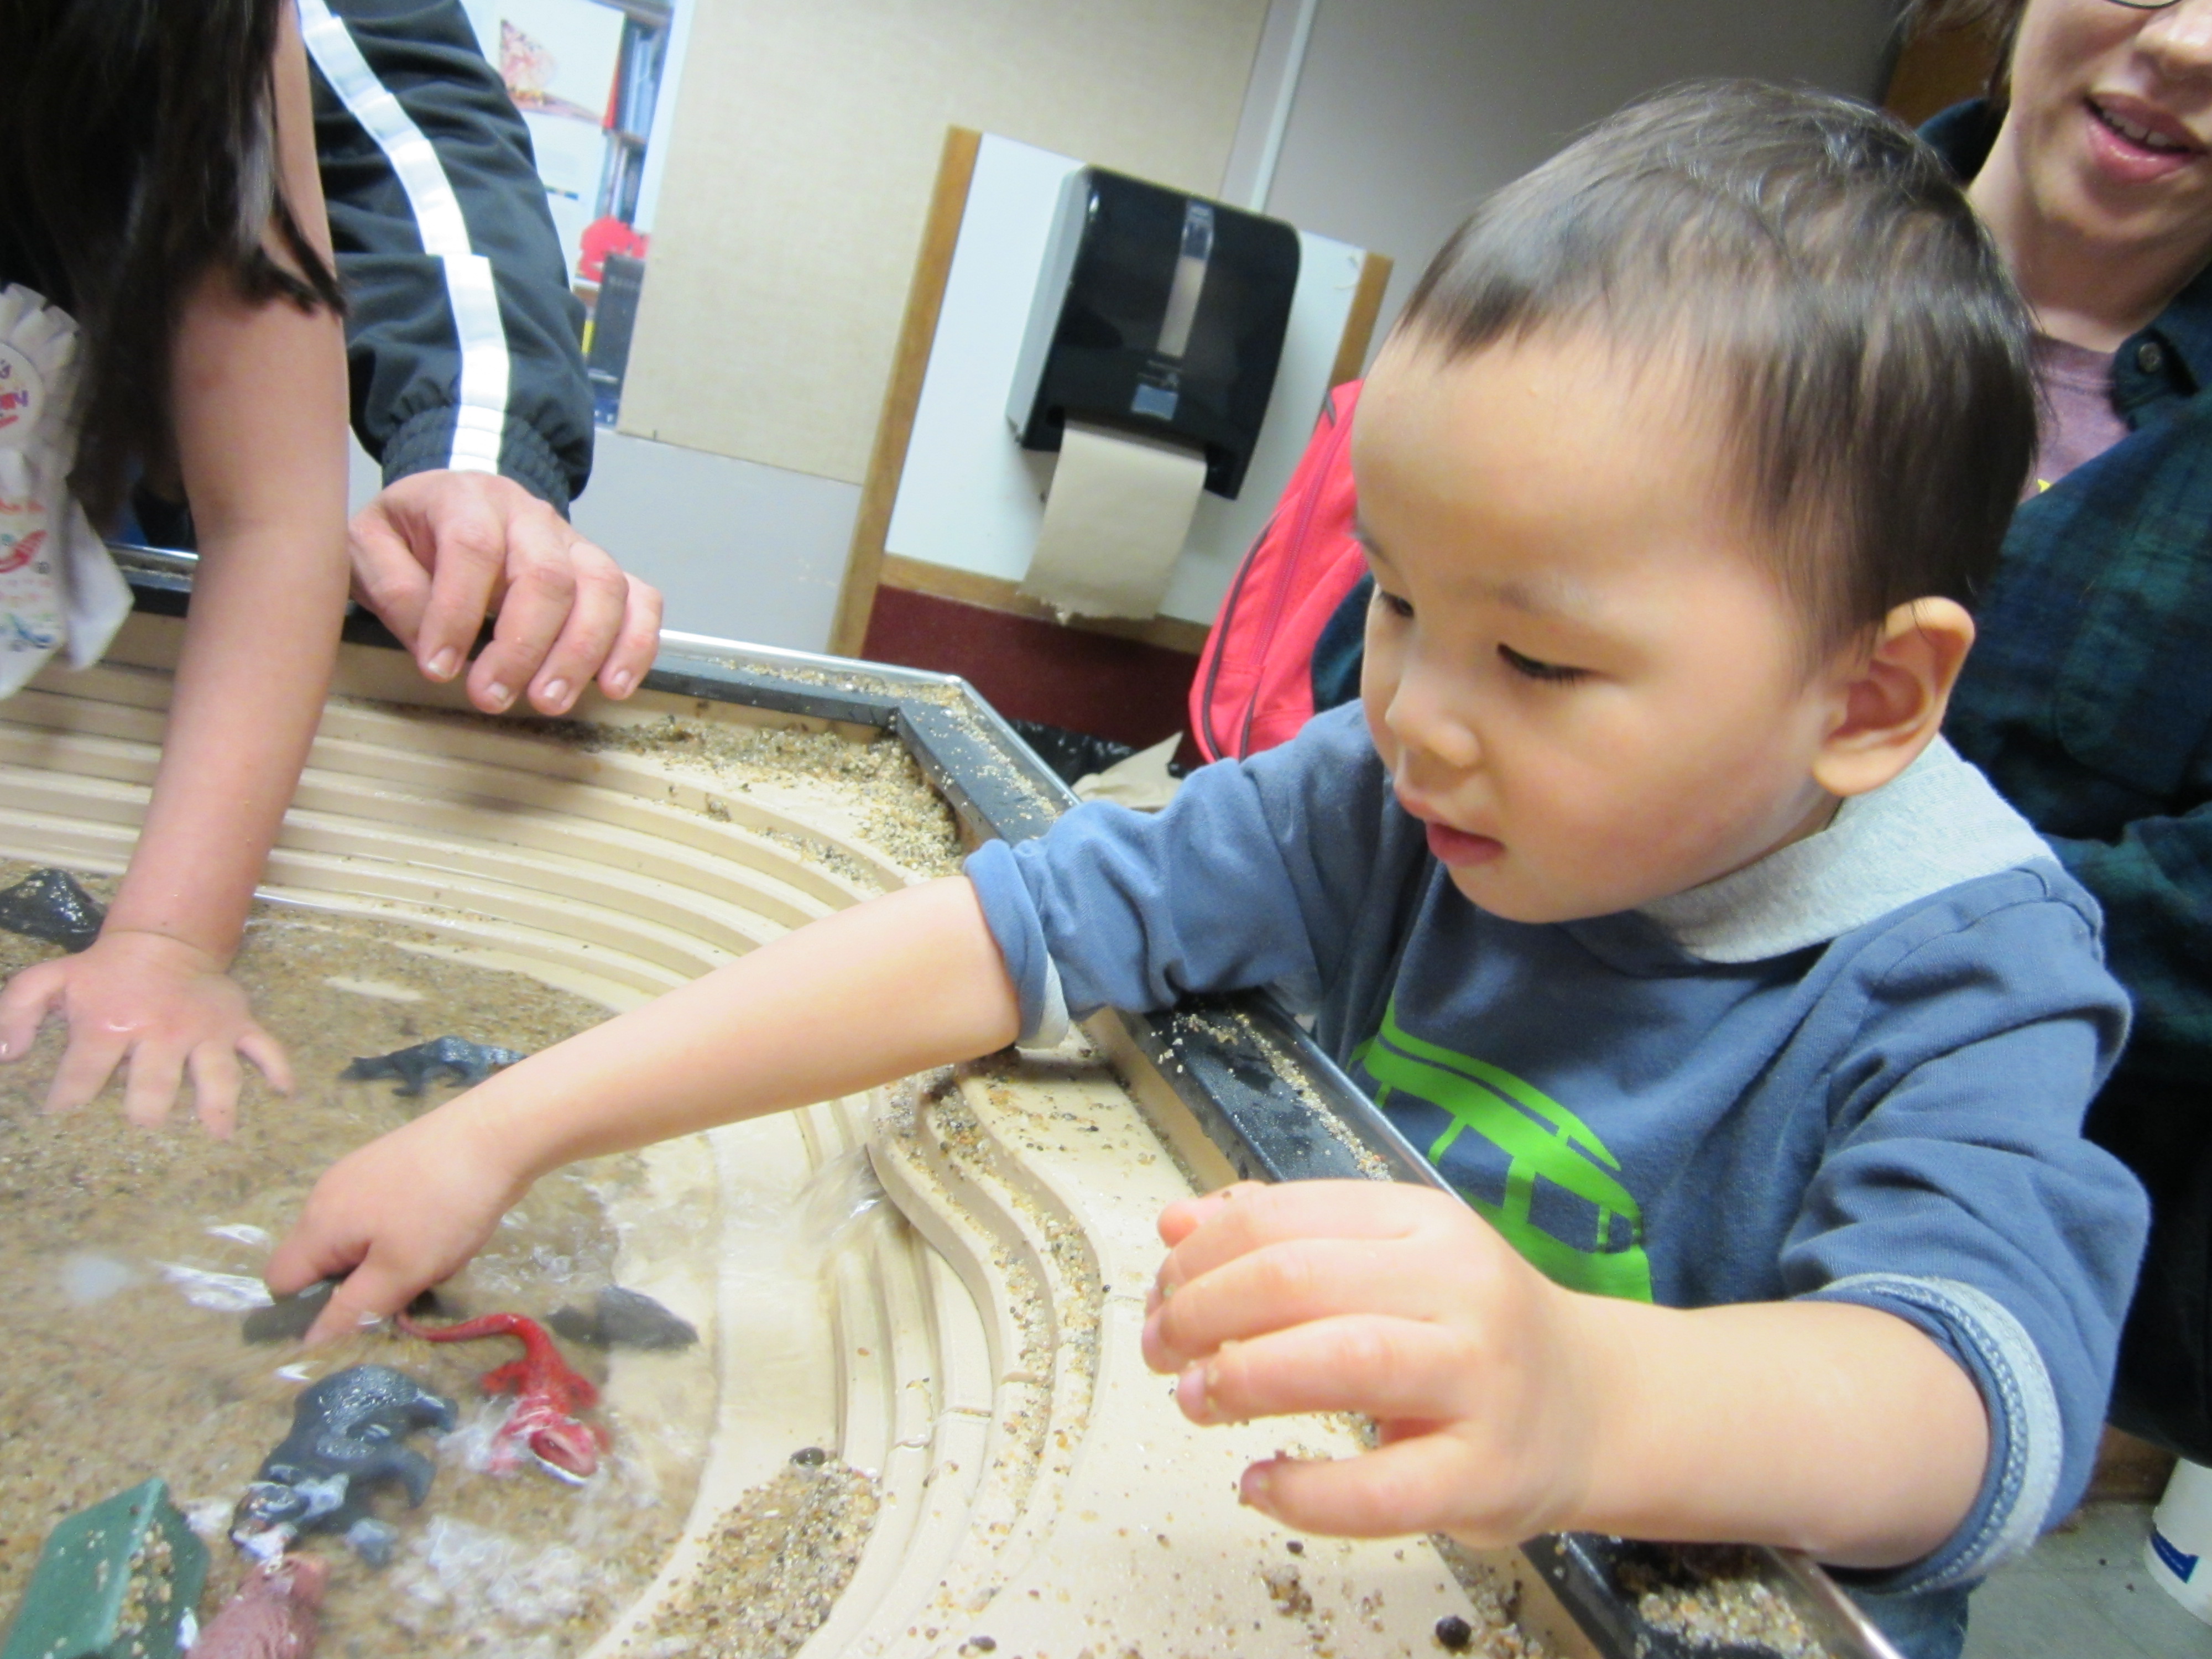 Tai loved splashing at the table where he could build a stream bed.